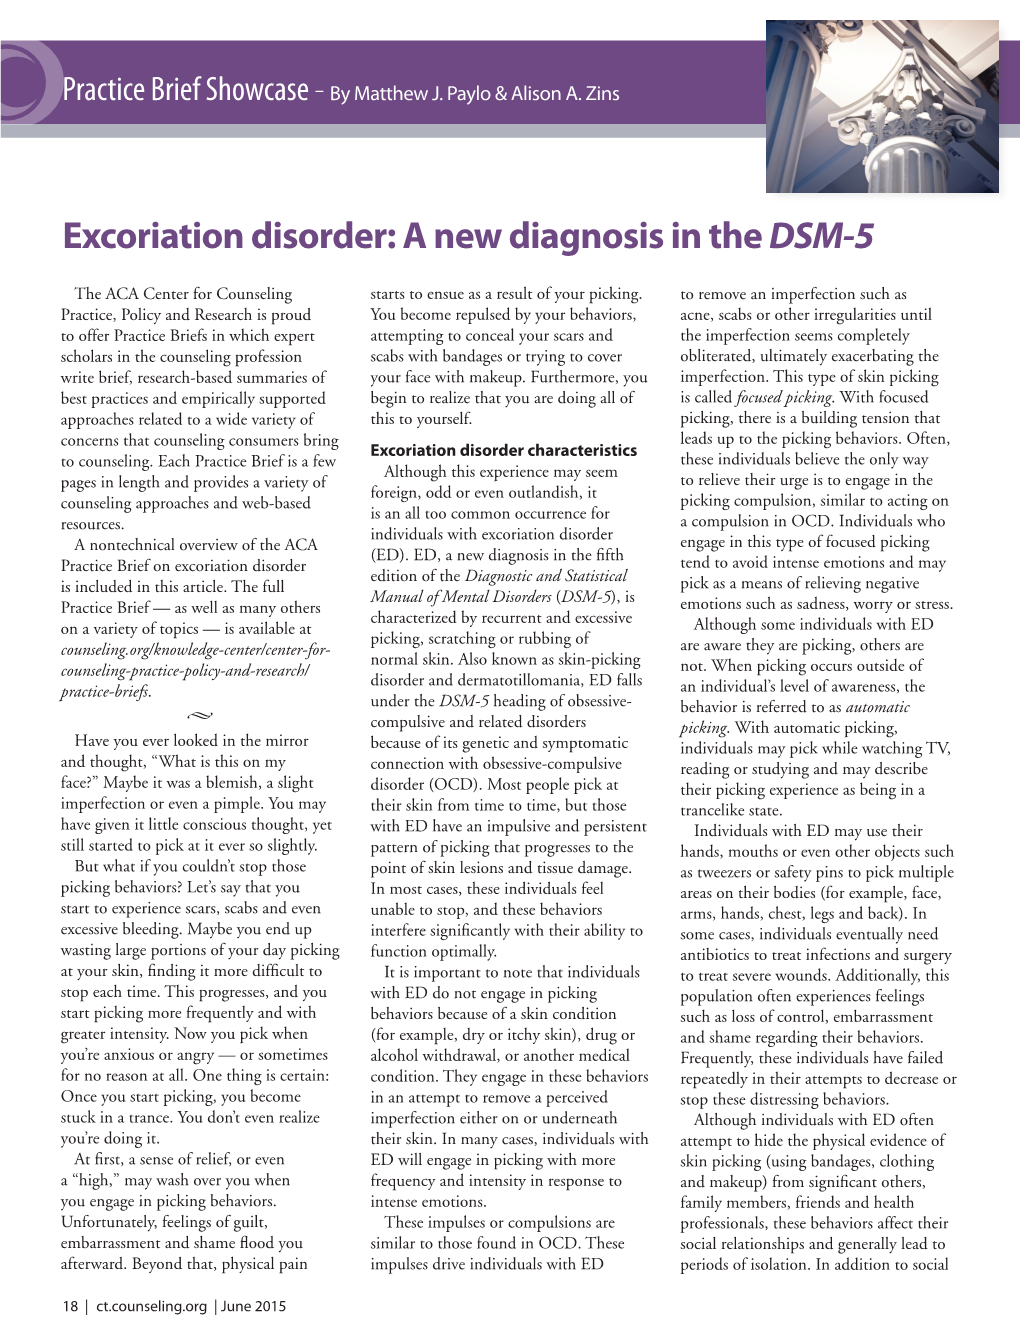 Excoriation Disorder: a New Diagnosis in the DSM-5